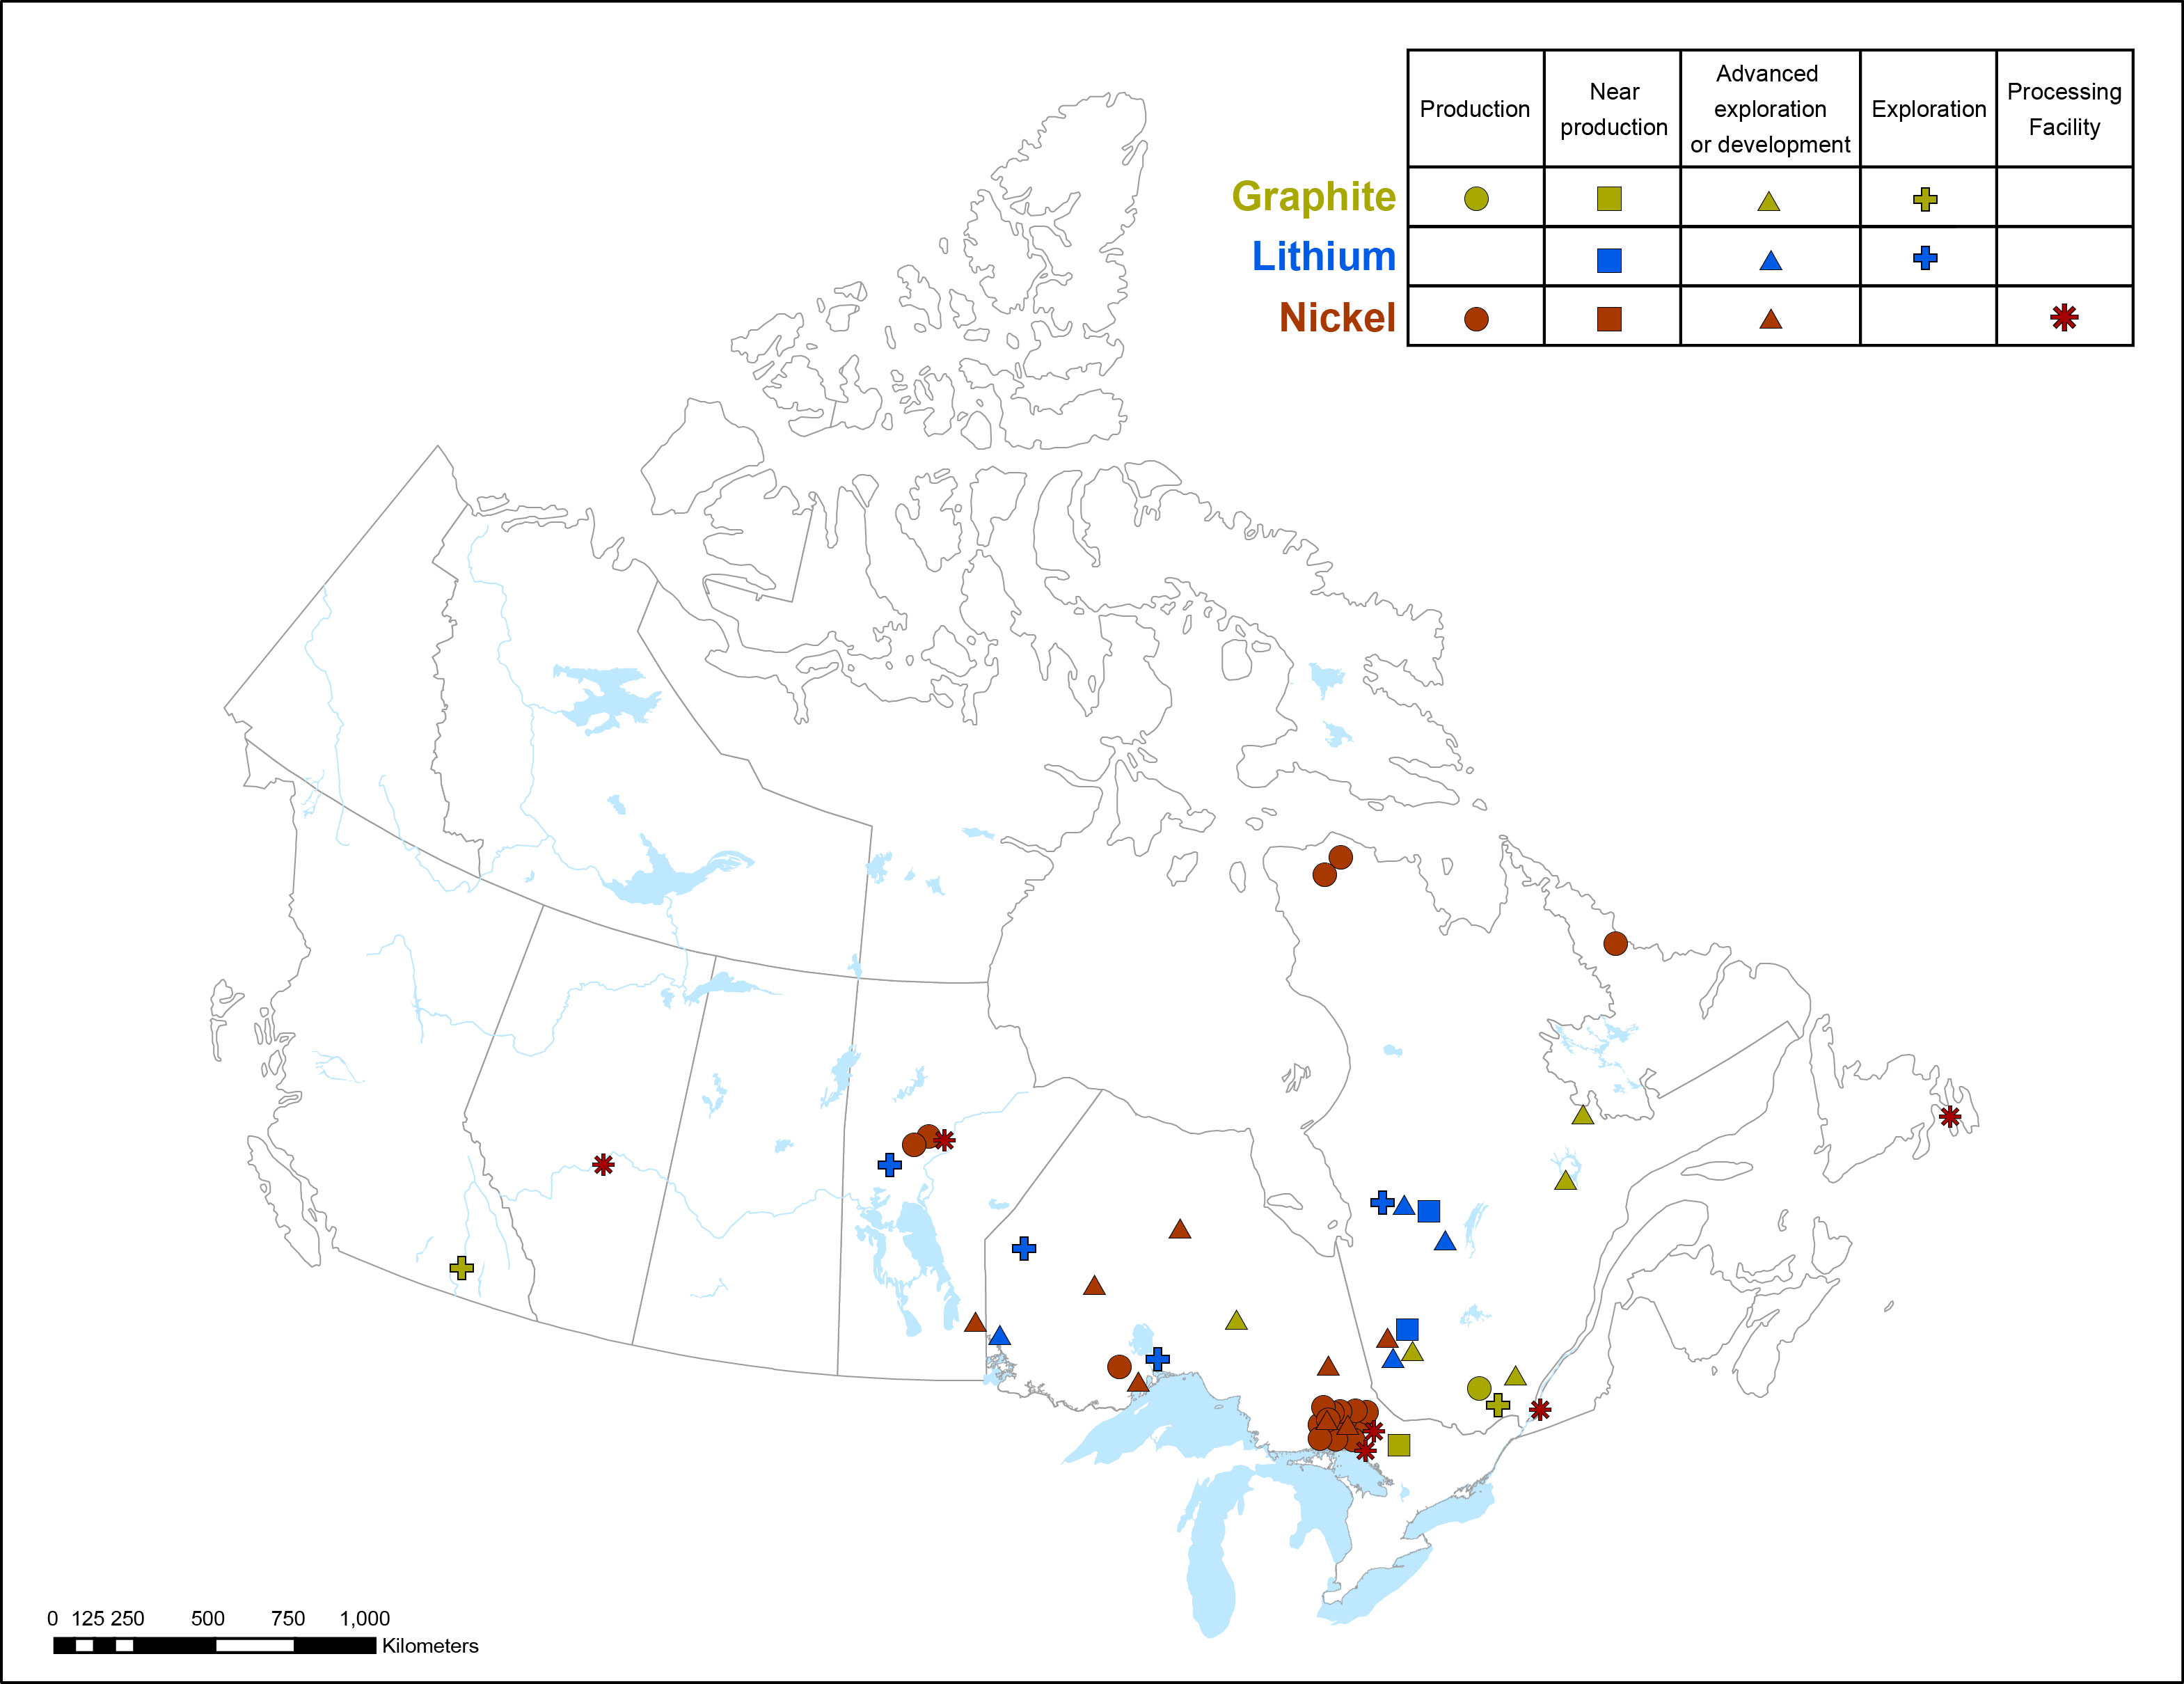 Figure 2 is a map of Canada displaying the geographic location of metal mines, smelters, and refineries 